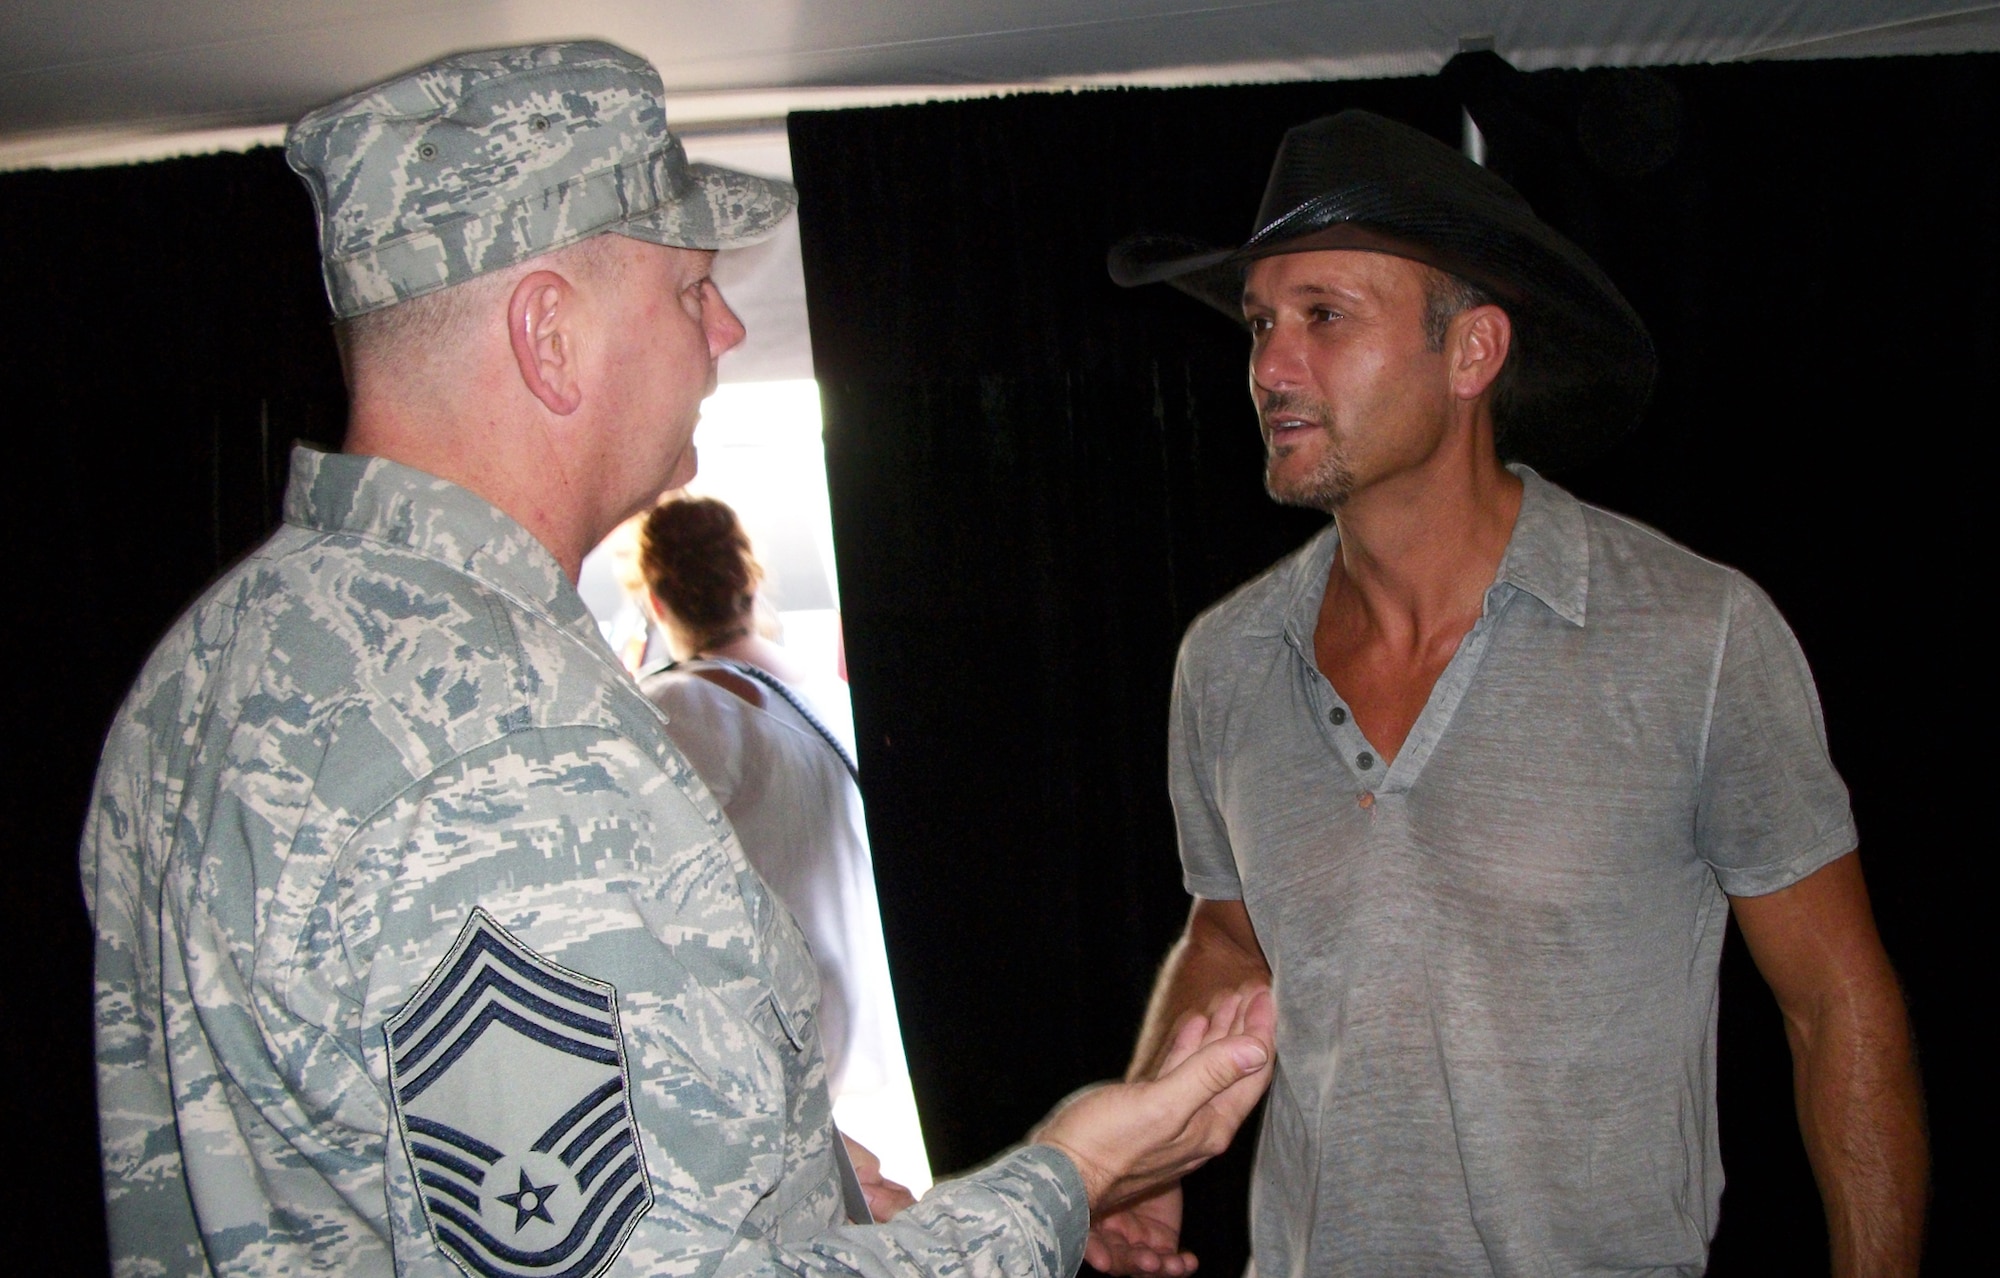 Chief Master Sgt. Vincent Meyer extends his hand to "coin" Tim McGraw before the country music legend opened a concert July 31 in Englewood, Colo. Chief Meyer, the senior recruiter at Peterson Air Force Base, Colo., presented the Air Force Reserve Command recruiting coin to Mr. McGraw as part of his support to the Get-1-Now program. Air Force Reservists can earn prizes and access to events, like the Tim McGraw concert, by referring individuals to AF Reserve recruiters for possible AF Reserve jobs. For more information on the Get-1-Now program, visit www.get1now.us. (Courtesy photo)